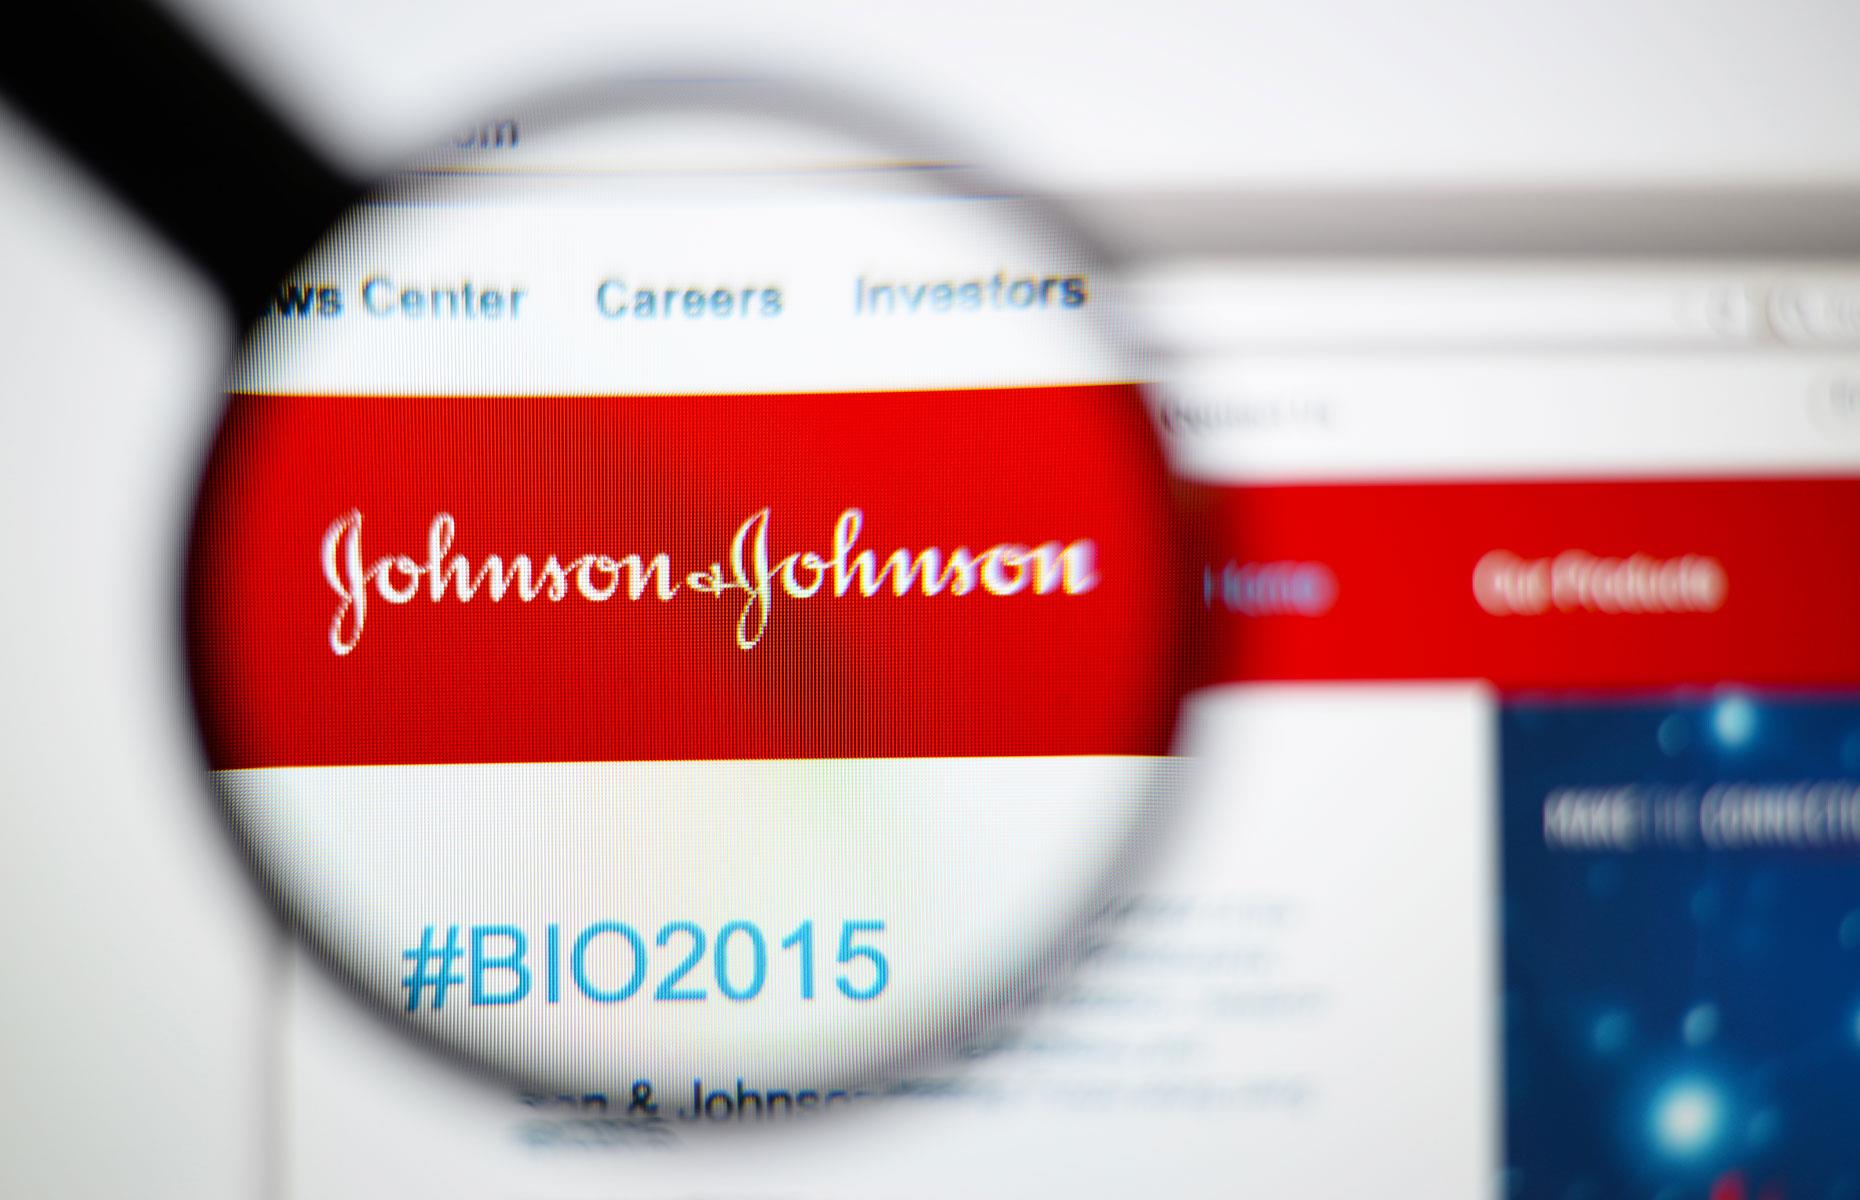 1944 – Johnson & Johnson: $1,000 invested then is worth $7.5 million (£5.1) + dividends today